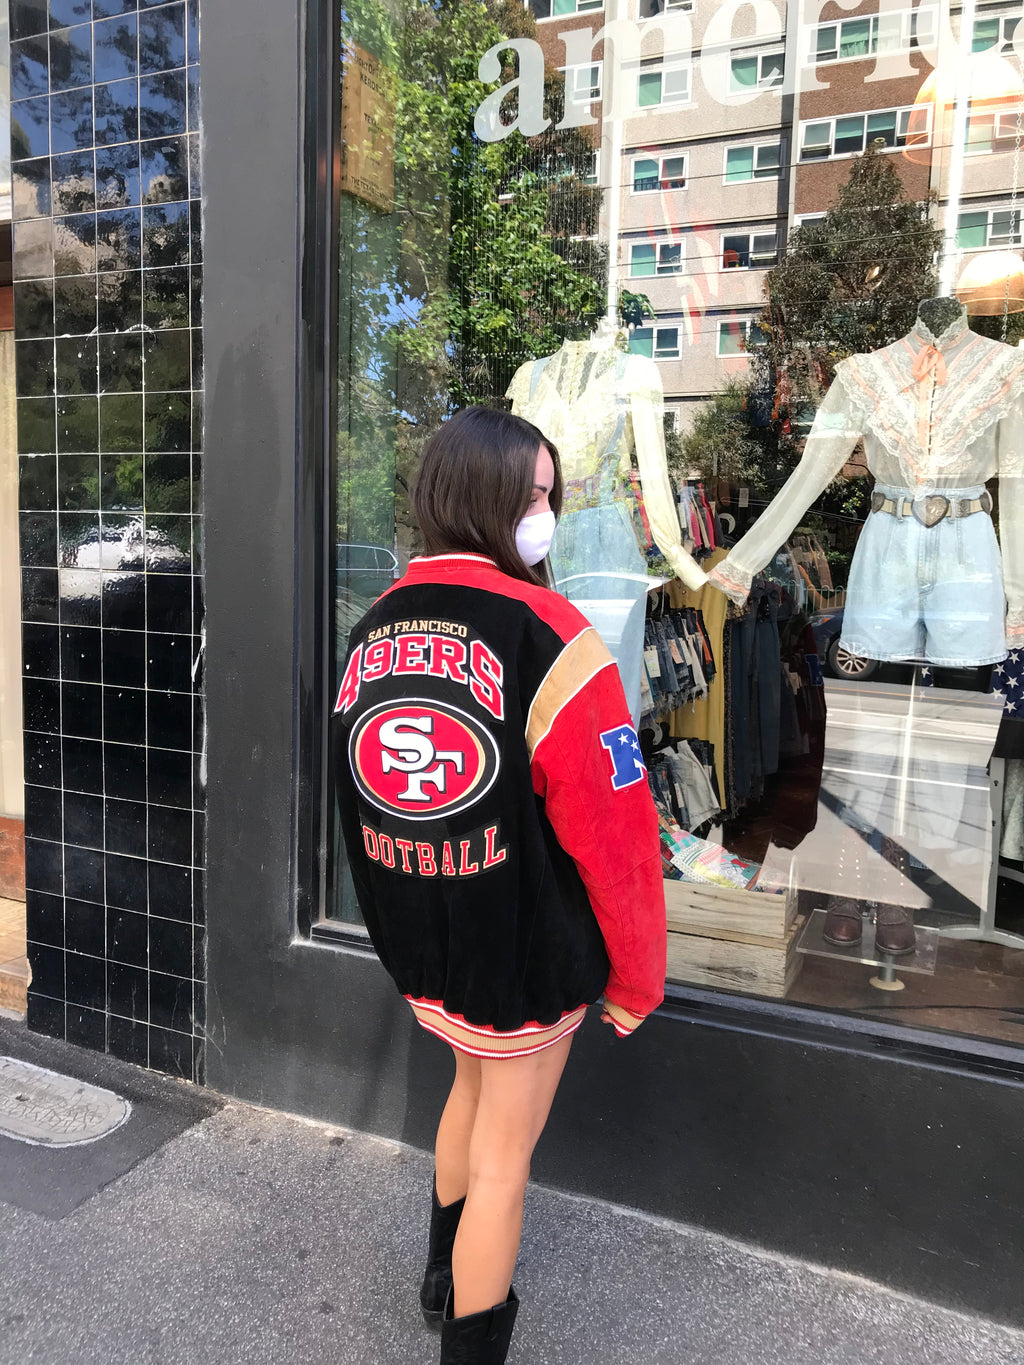 NFL San Francisco 49 ERS Leather Vintage 90’s Bomber Sporting Jacket by G-111 Apparel USA